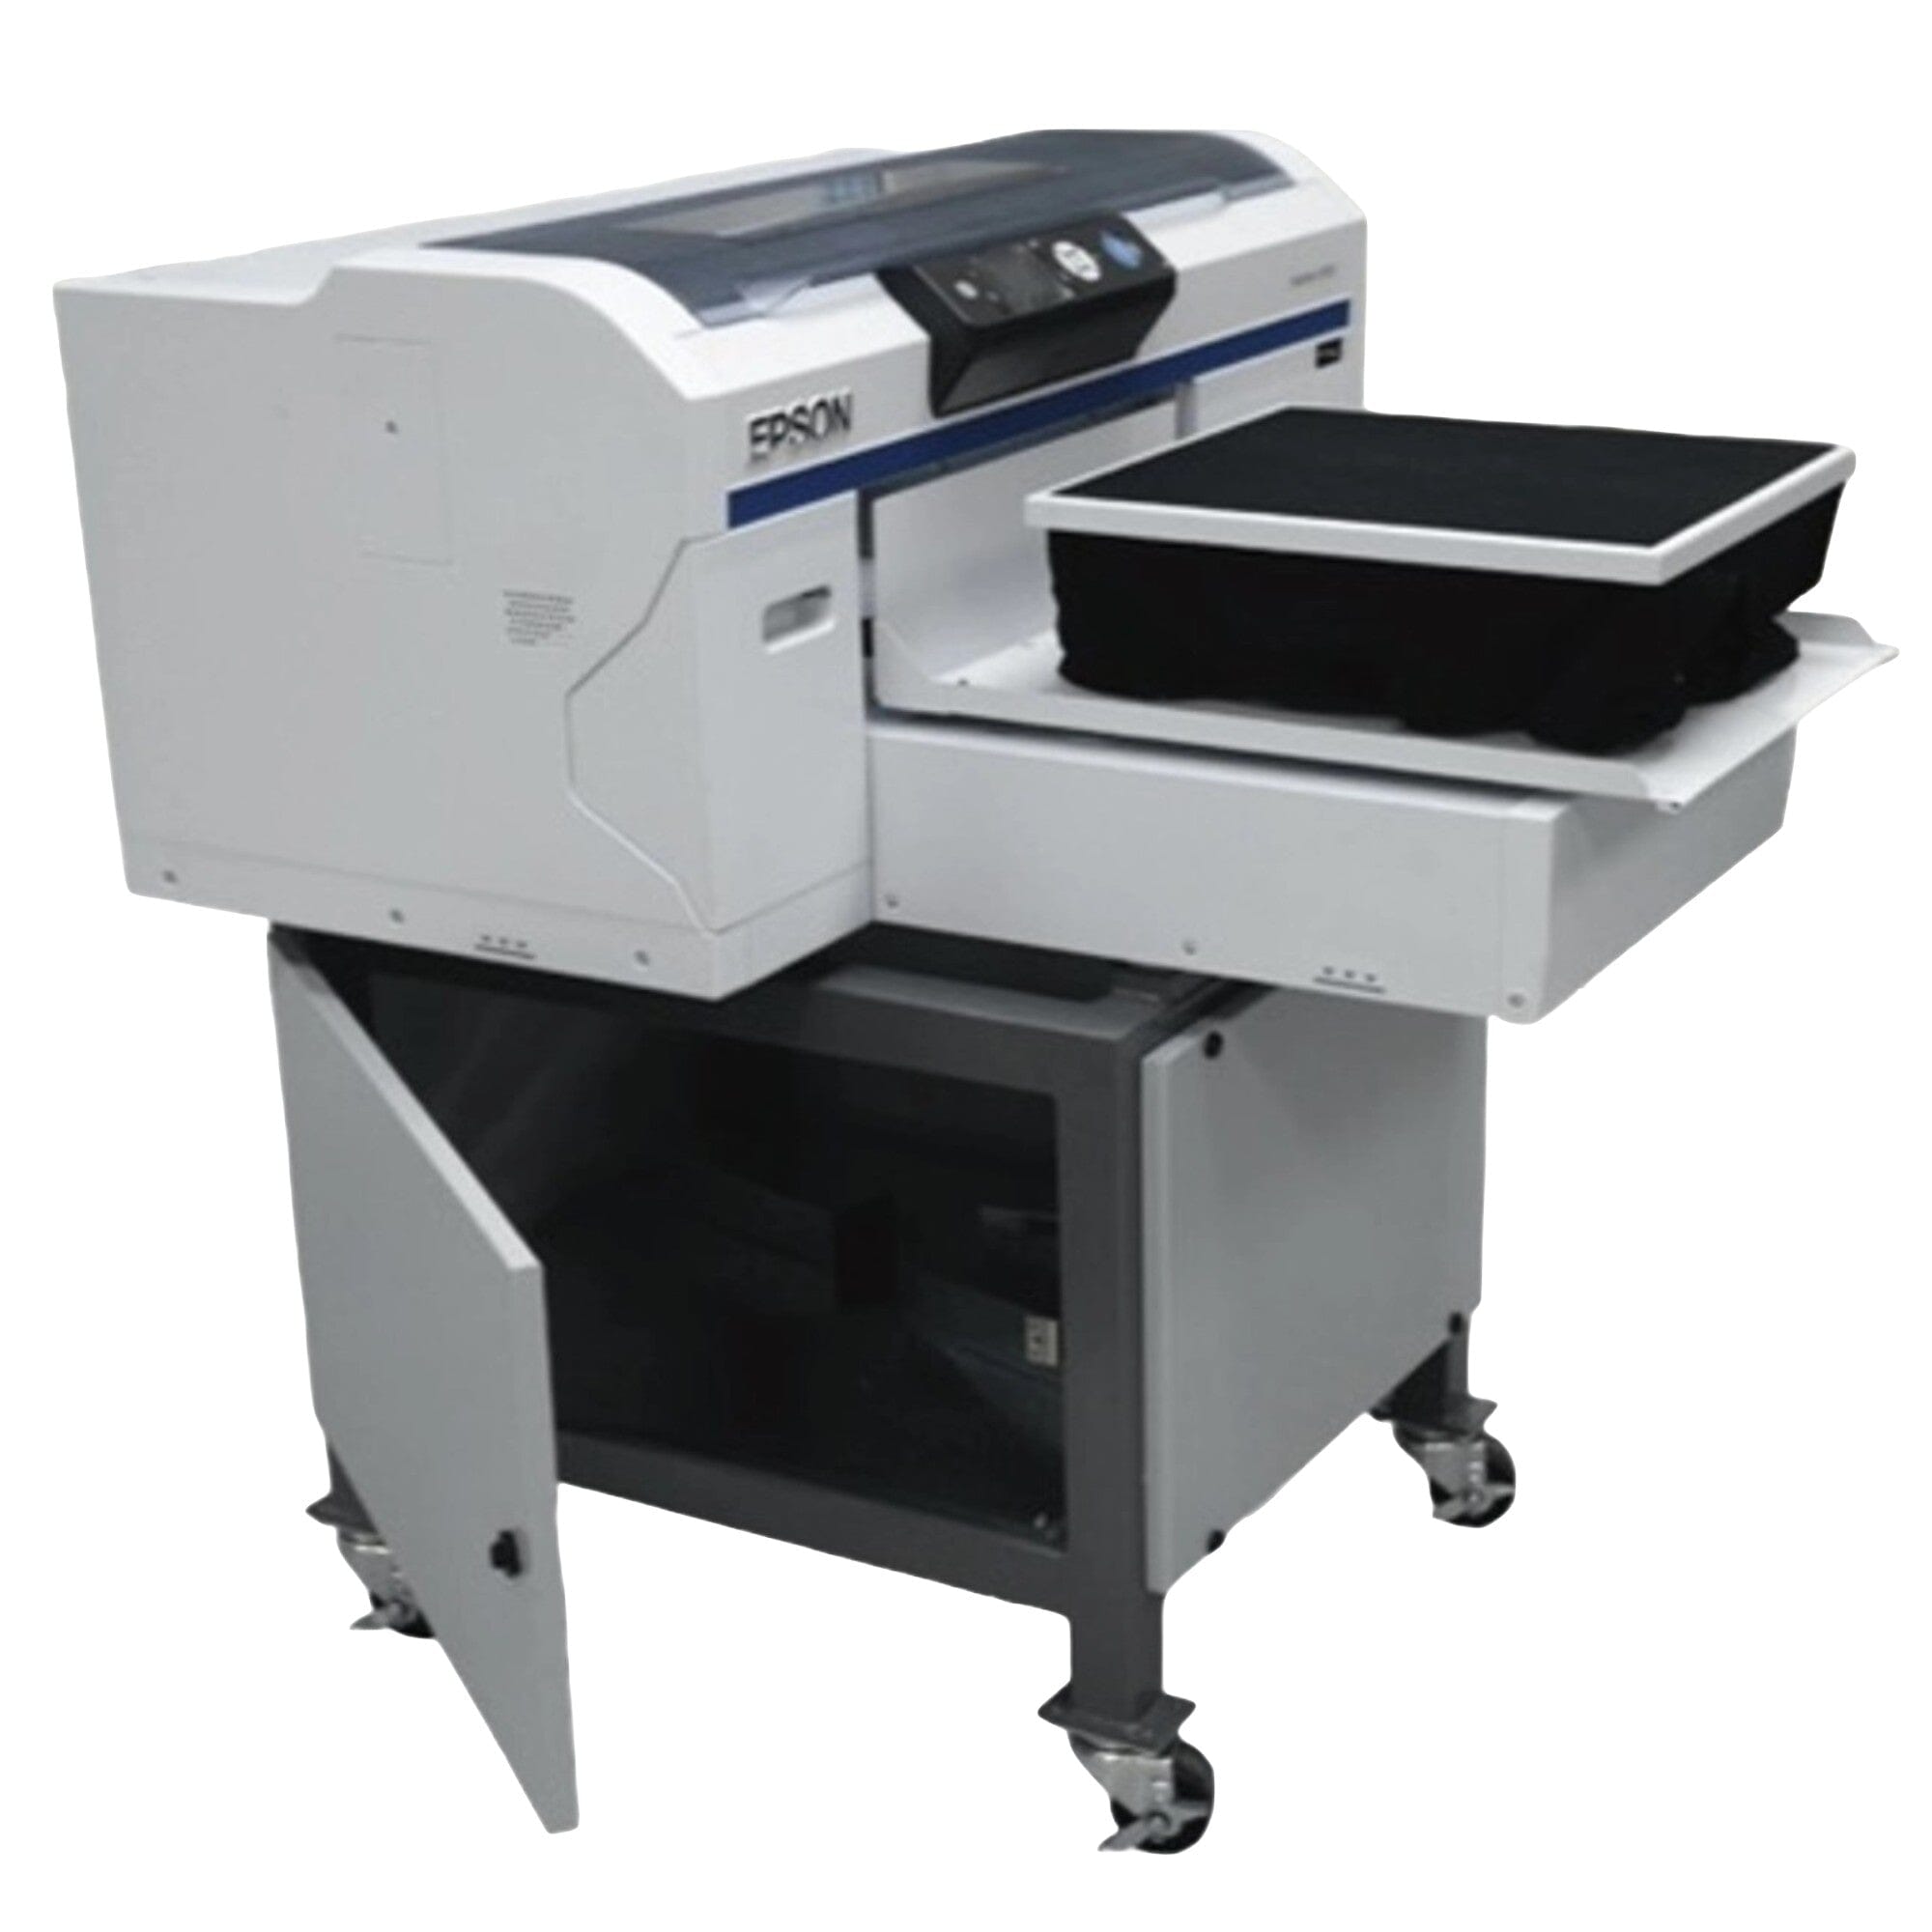 SureColor F2100 Direct-to-Garment Printer, Products